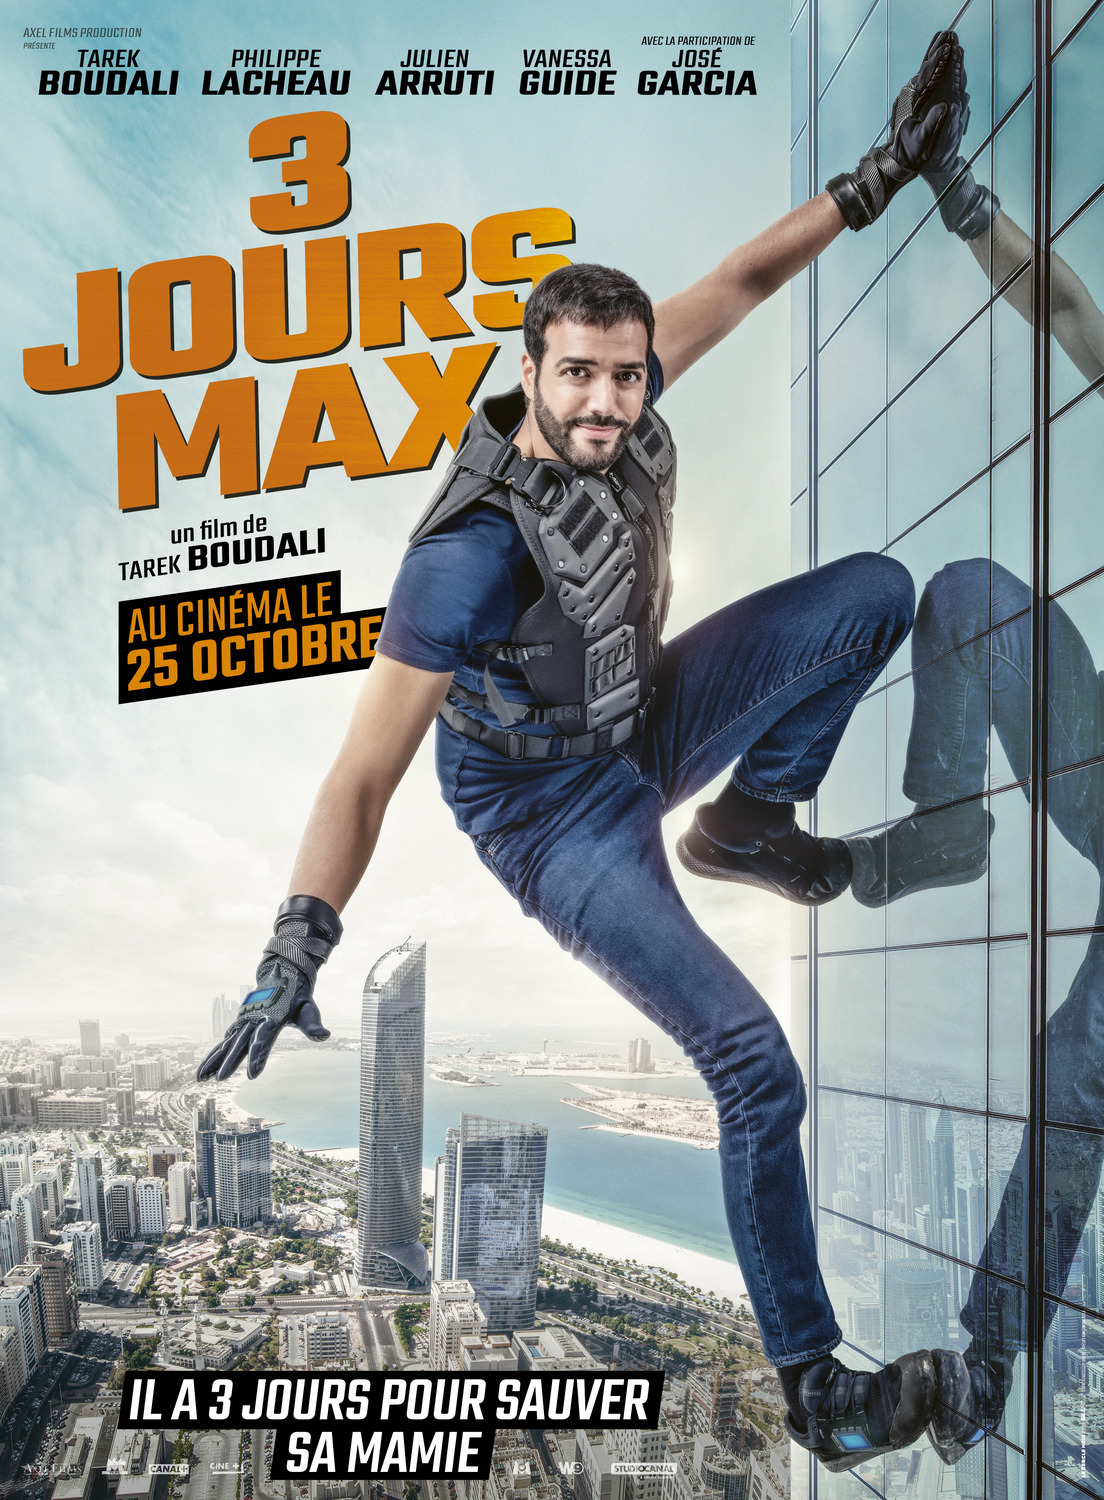 Extra Large Movie Poster Image for 3 jours max (#1 of 2)